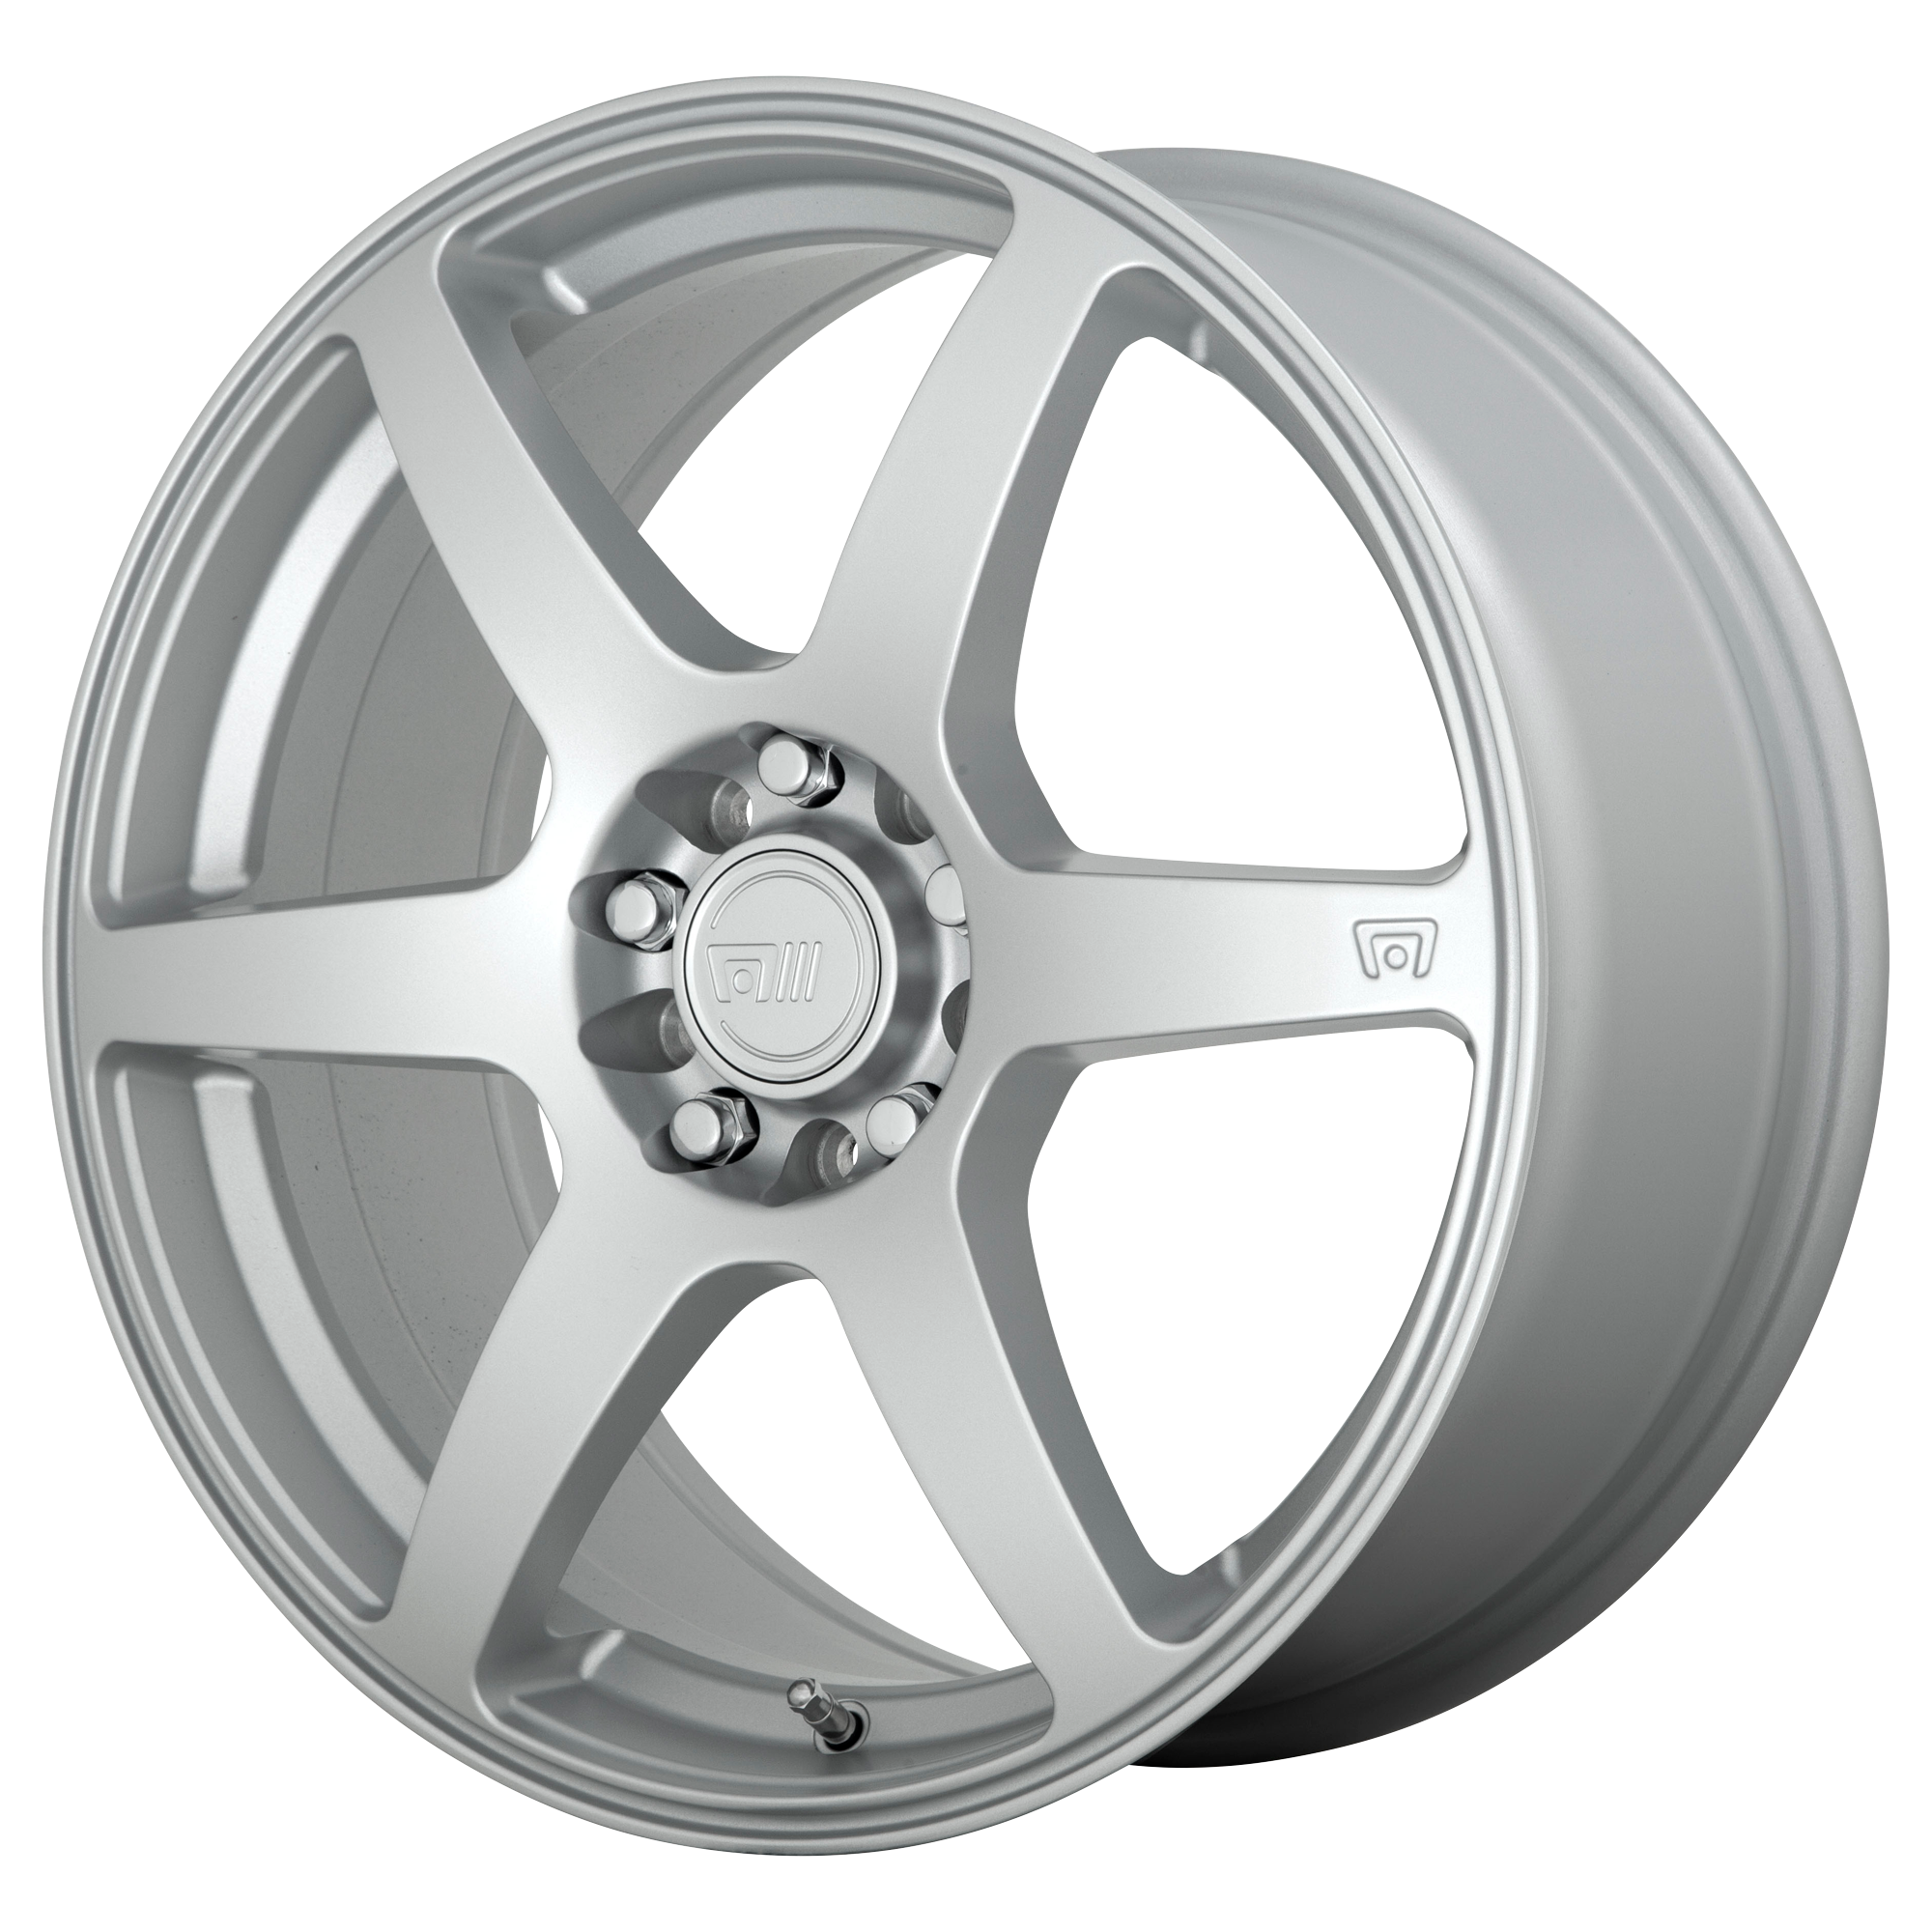 CS6 17x7 5x110.00/5x115.00 HYPER SILVER (40 mm) - Tires and Engine Performance